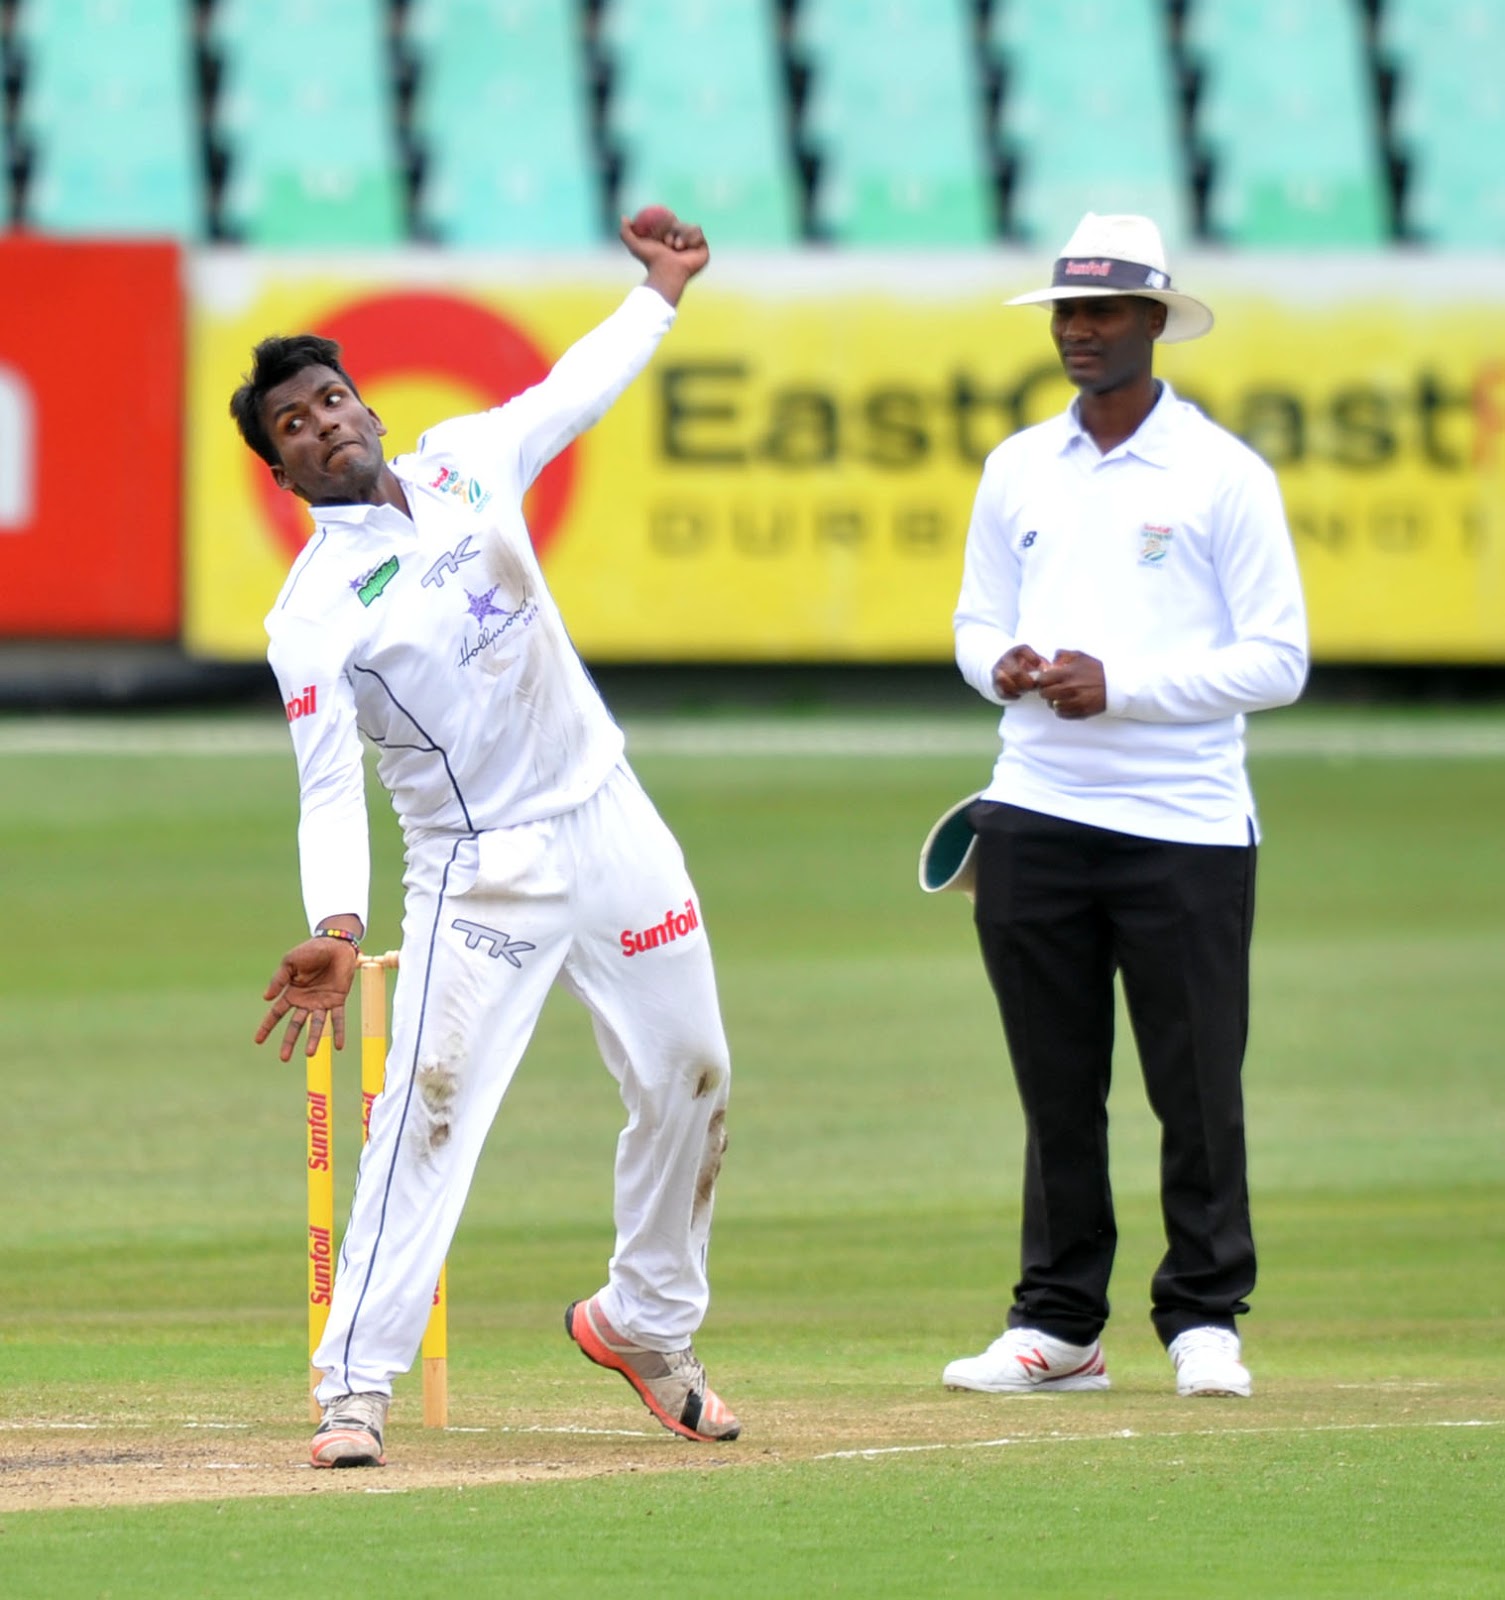 Having returned from India, Hollywoodbets Dolphins all-rounder Senuran Muthusamy will return to their squad for their CA 4-Day Domestic Series match with the Imperial Lions at Imperial Wanderers starting on Monday.